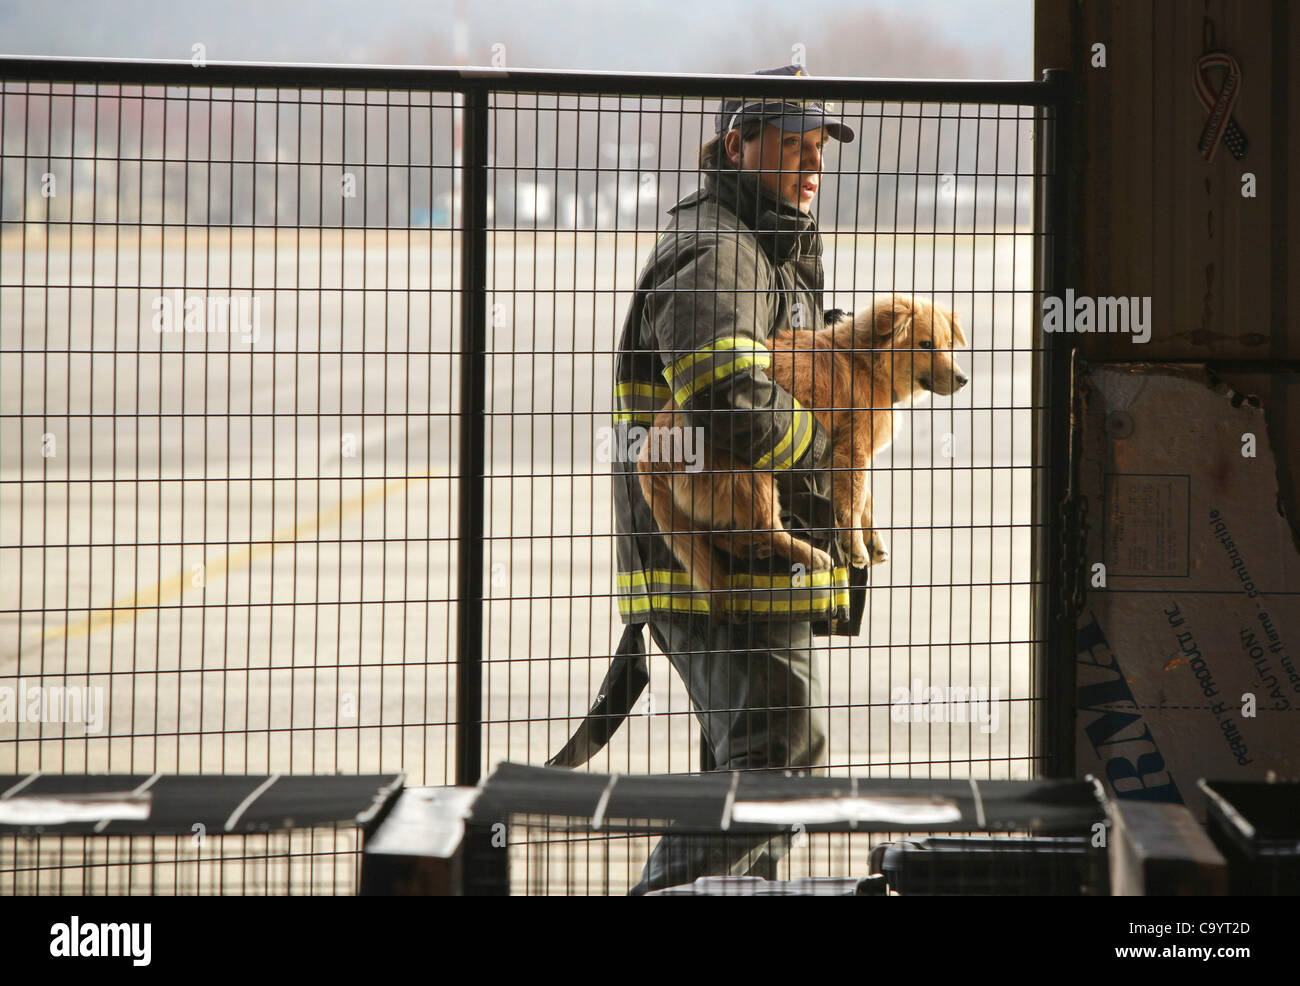 March 9, 2012 - London, Kentucky, USA - Brandon Zacharias, a member of the East Bernstadt Fire Department, brings into The Humane Society of the United States emergency animal shelter a dog he found in the aftermath of tornados that tore through East Bernstadt and areas around London, Ky. The emerge Stock Photo